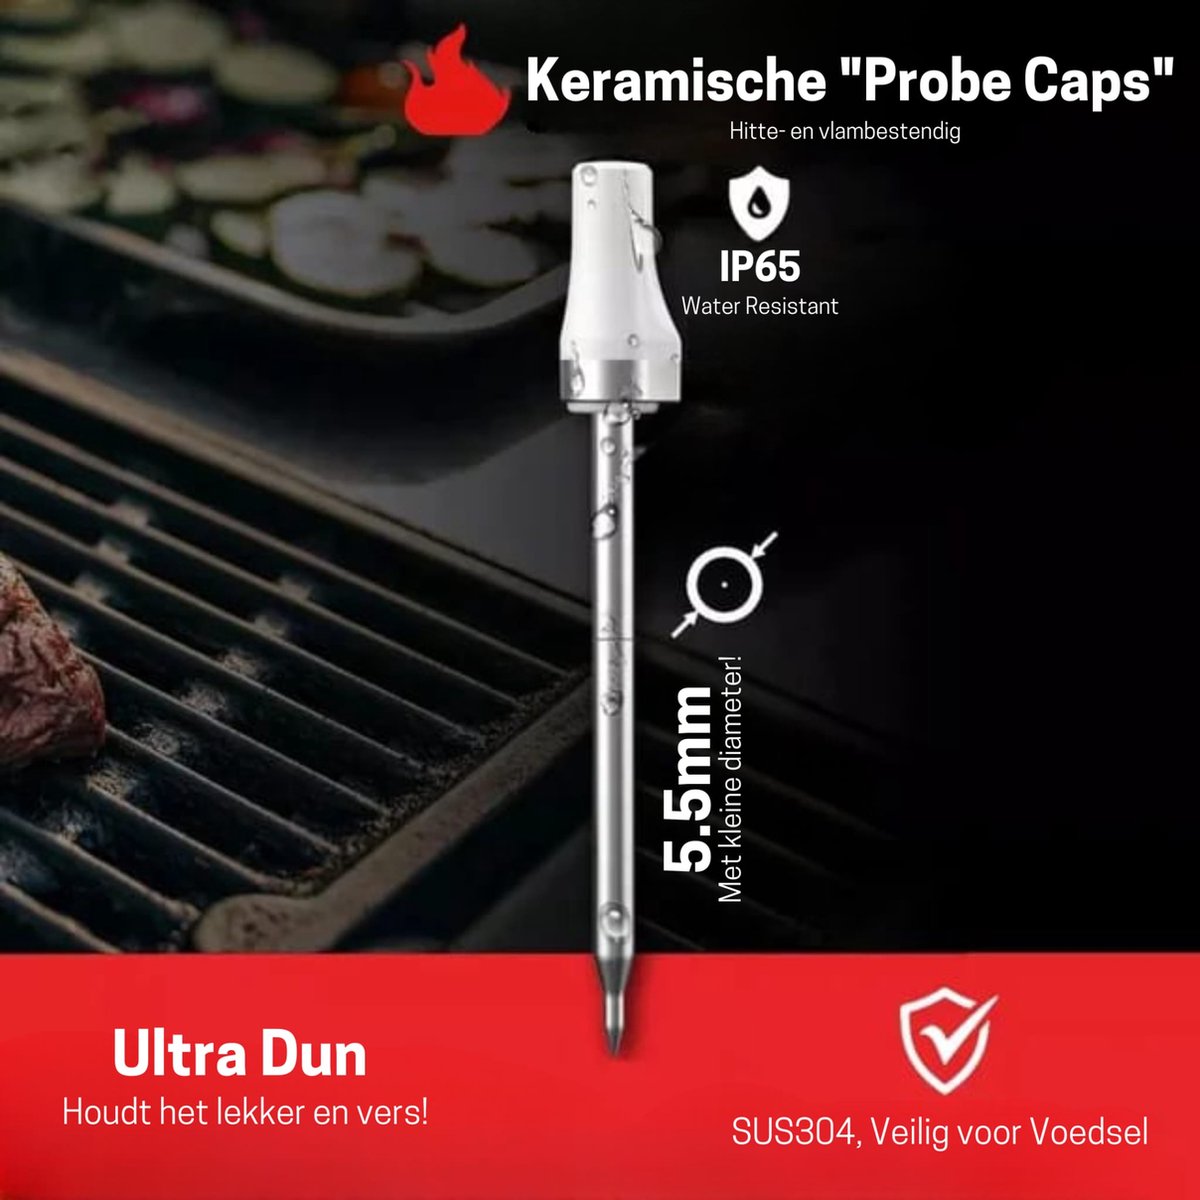 ToGrill draadloze vleesthermometer - Rvs - Keramisch - Bbq thermometer - Digitale thermometer - Oven thermometer - Kern tempratuur meten - App & Bleutooth thermometer - ToGrill